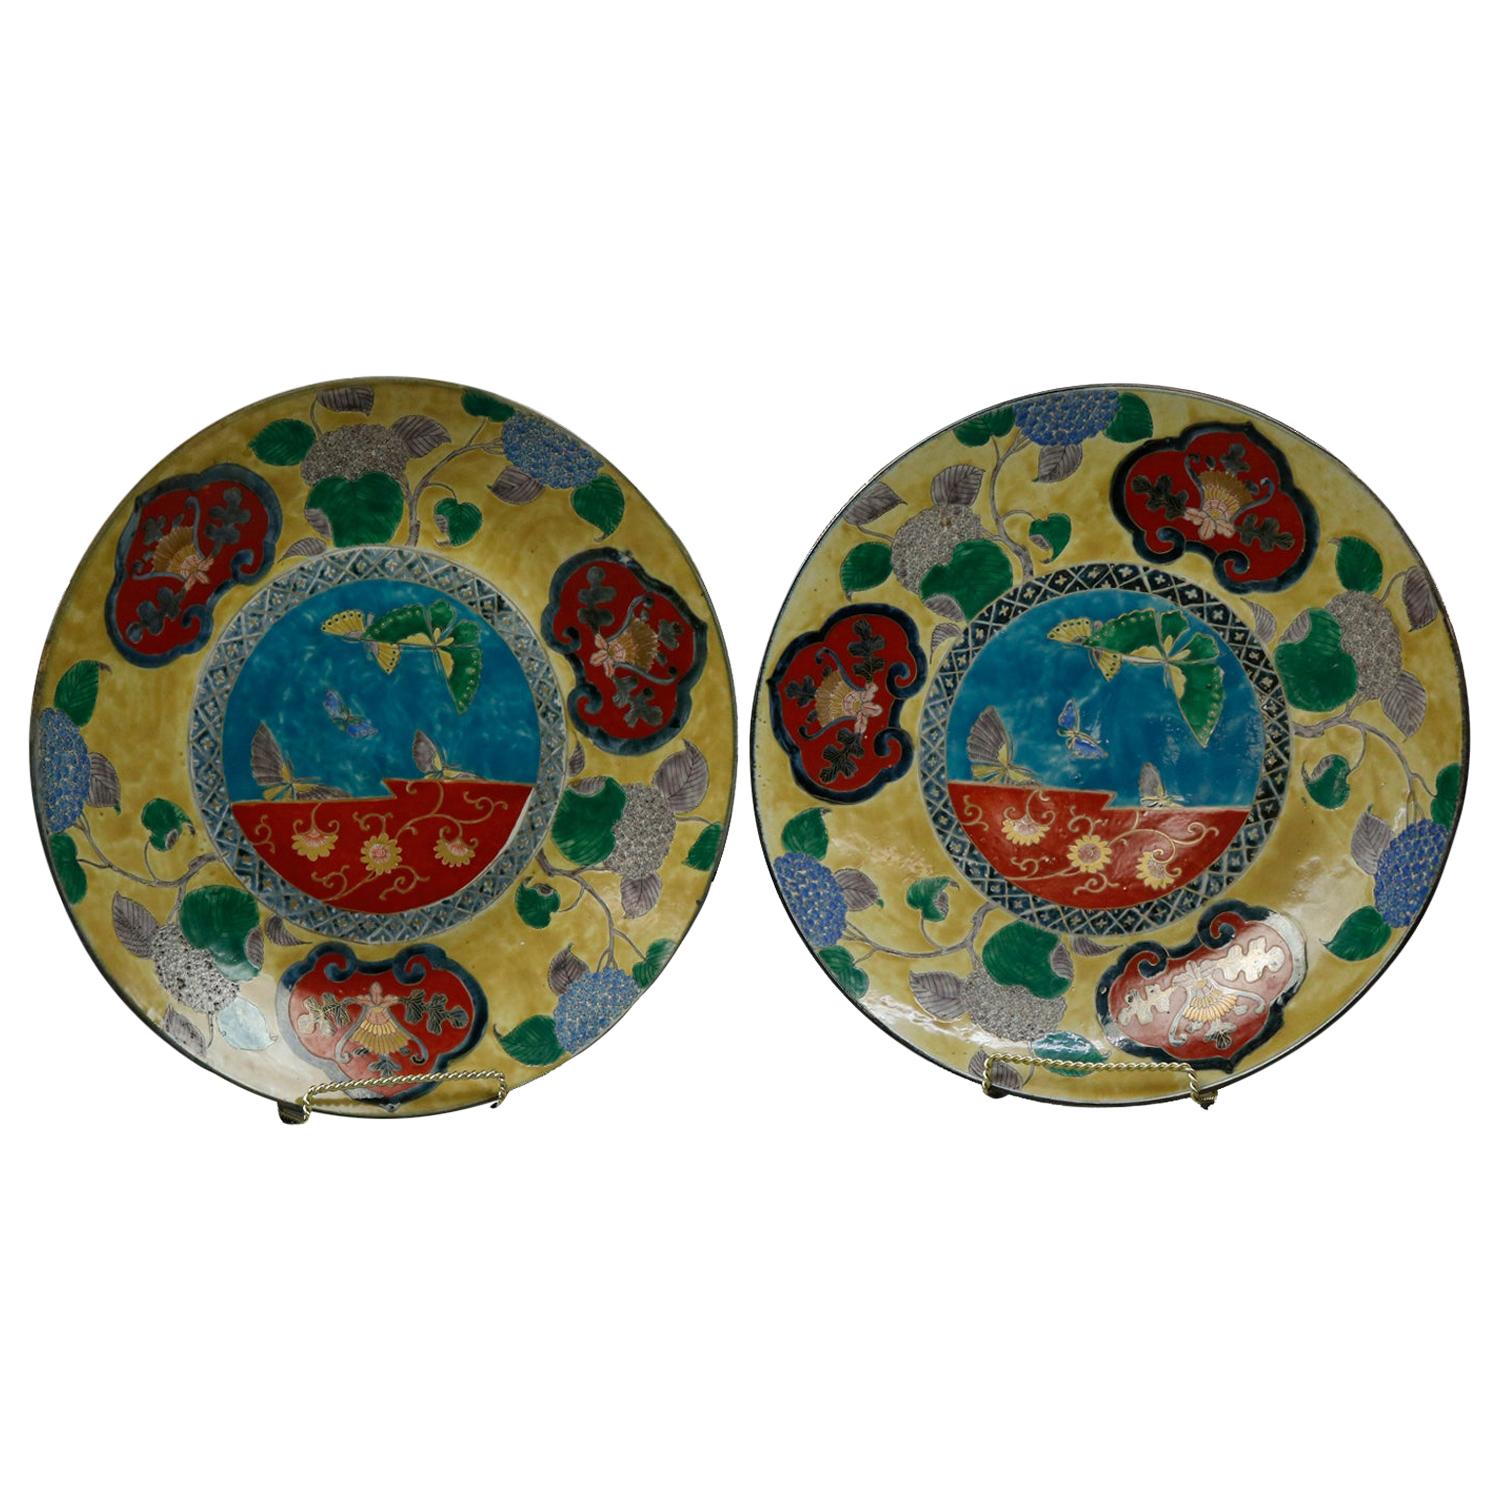 Antique Japanese Aesthetic Imari Porcelain Butterfly Charger, 19th Century, Pair